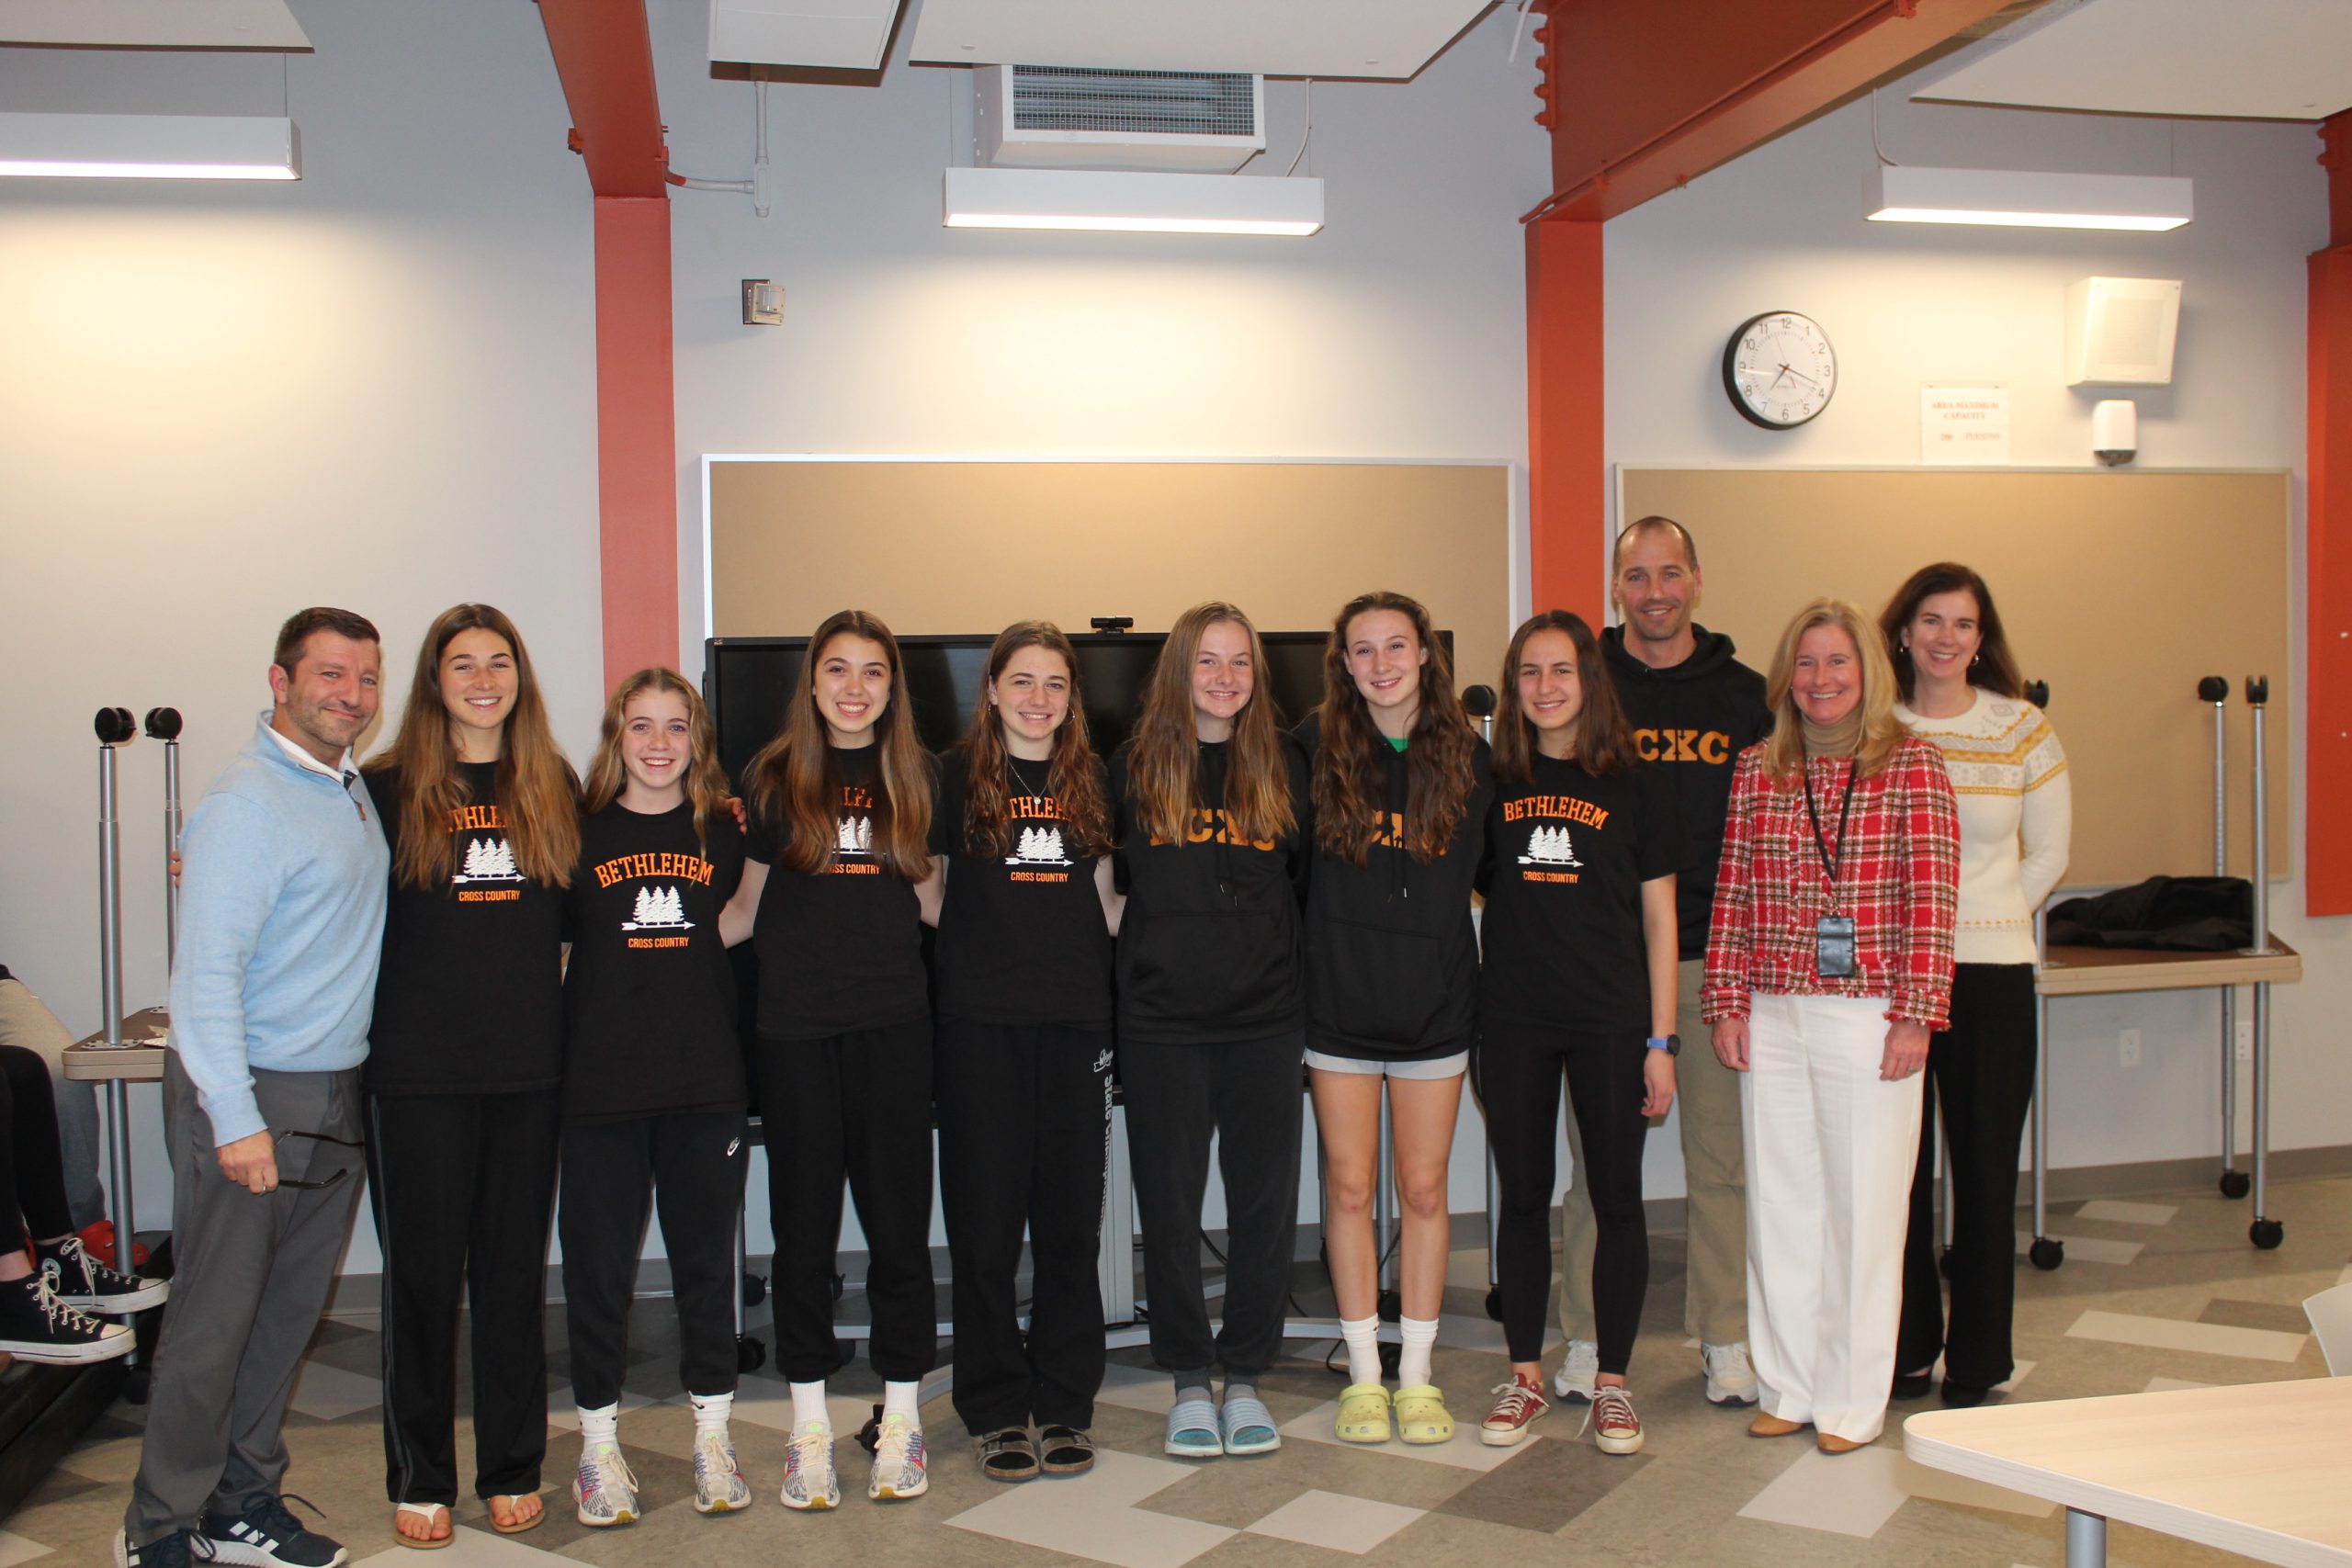 Girls Cross Country Team pictured with Athletic Director Len Kies, Superintendent Jody Monroe, and Board President Holly Dellenbough